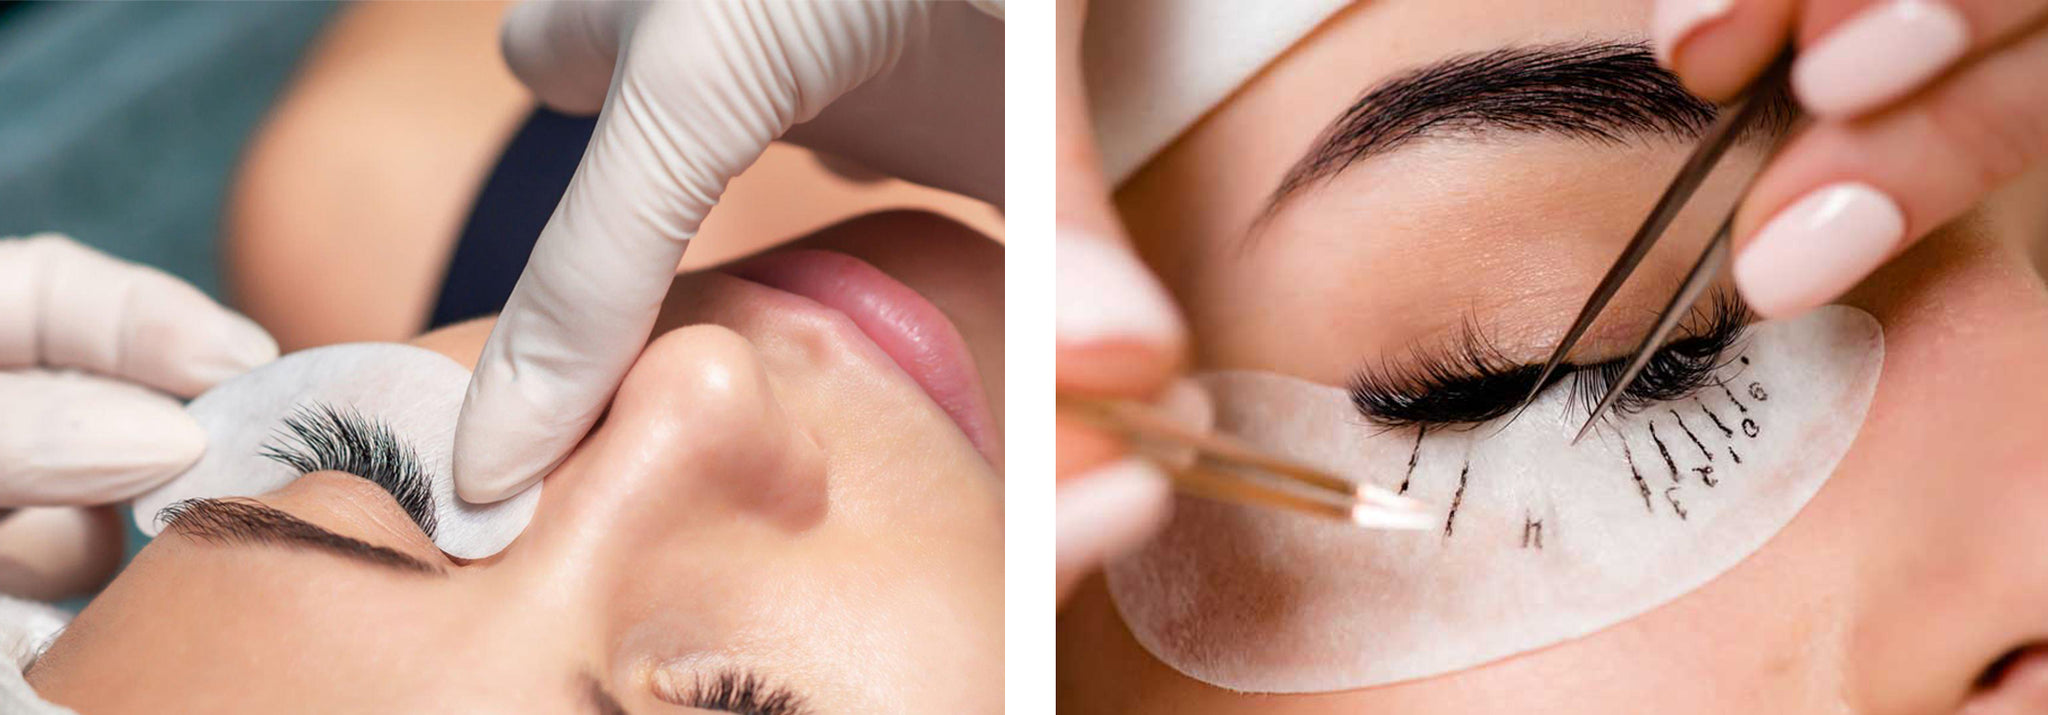 On the left, a technician carefully places an under-eye pad to isolate and protect lower lashes. On the right, the technician uses the pad to create a lash mapping, aiding in precise placement and design for the lash extensions, demonstrating the multifunctional use of under-eye pads in the process